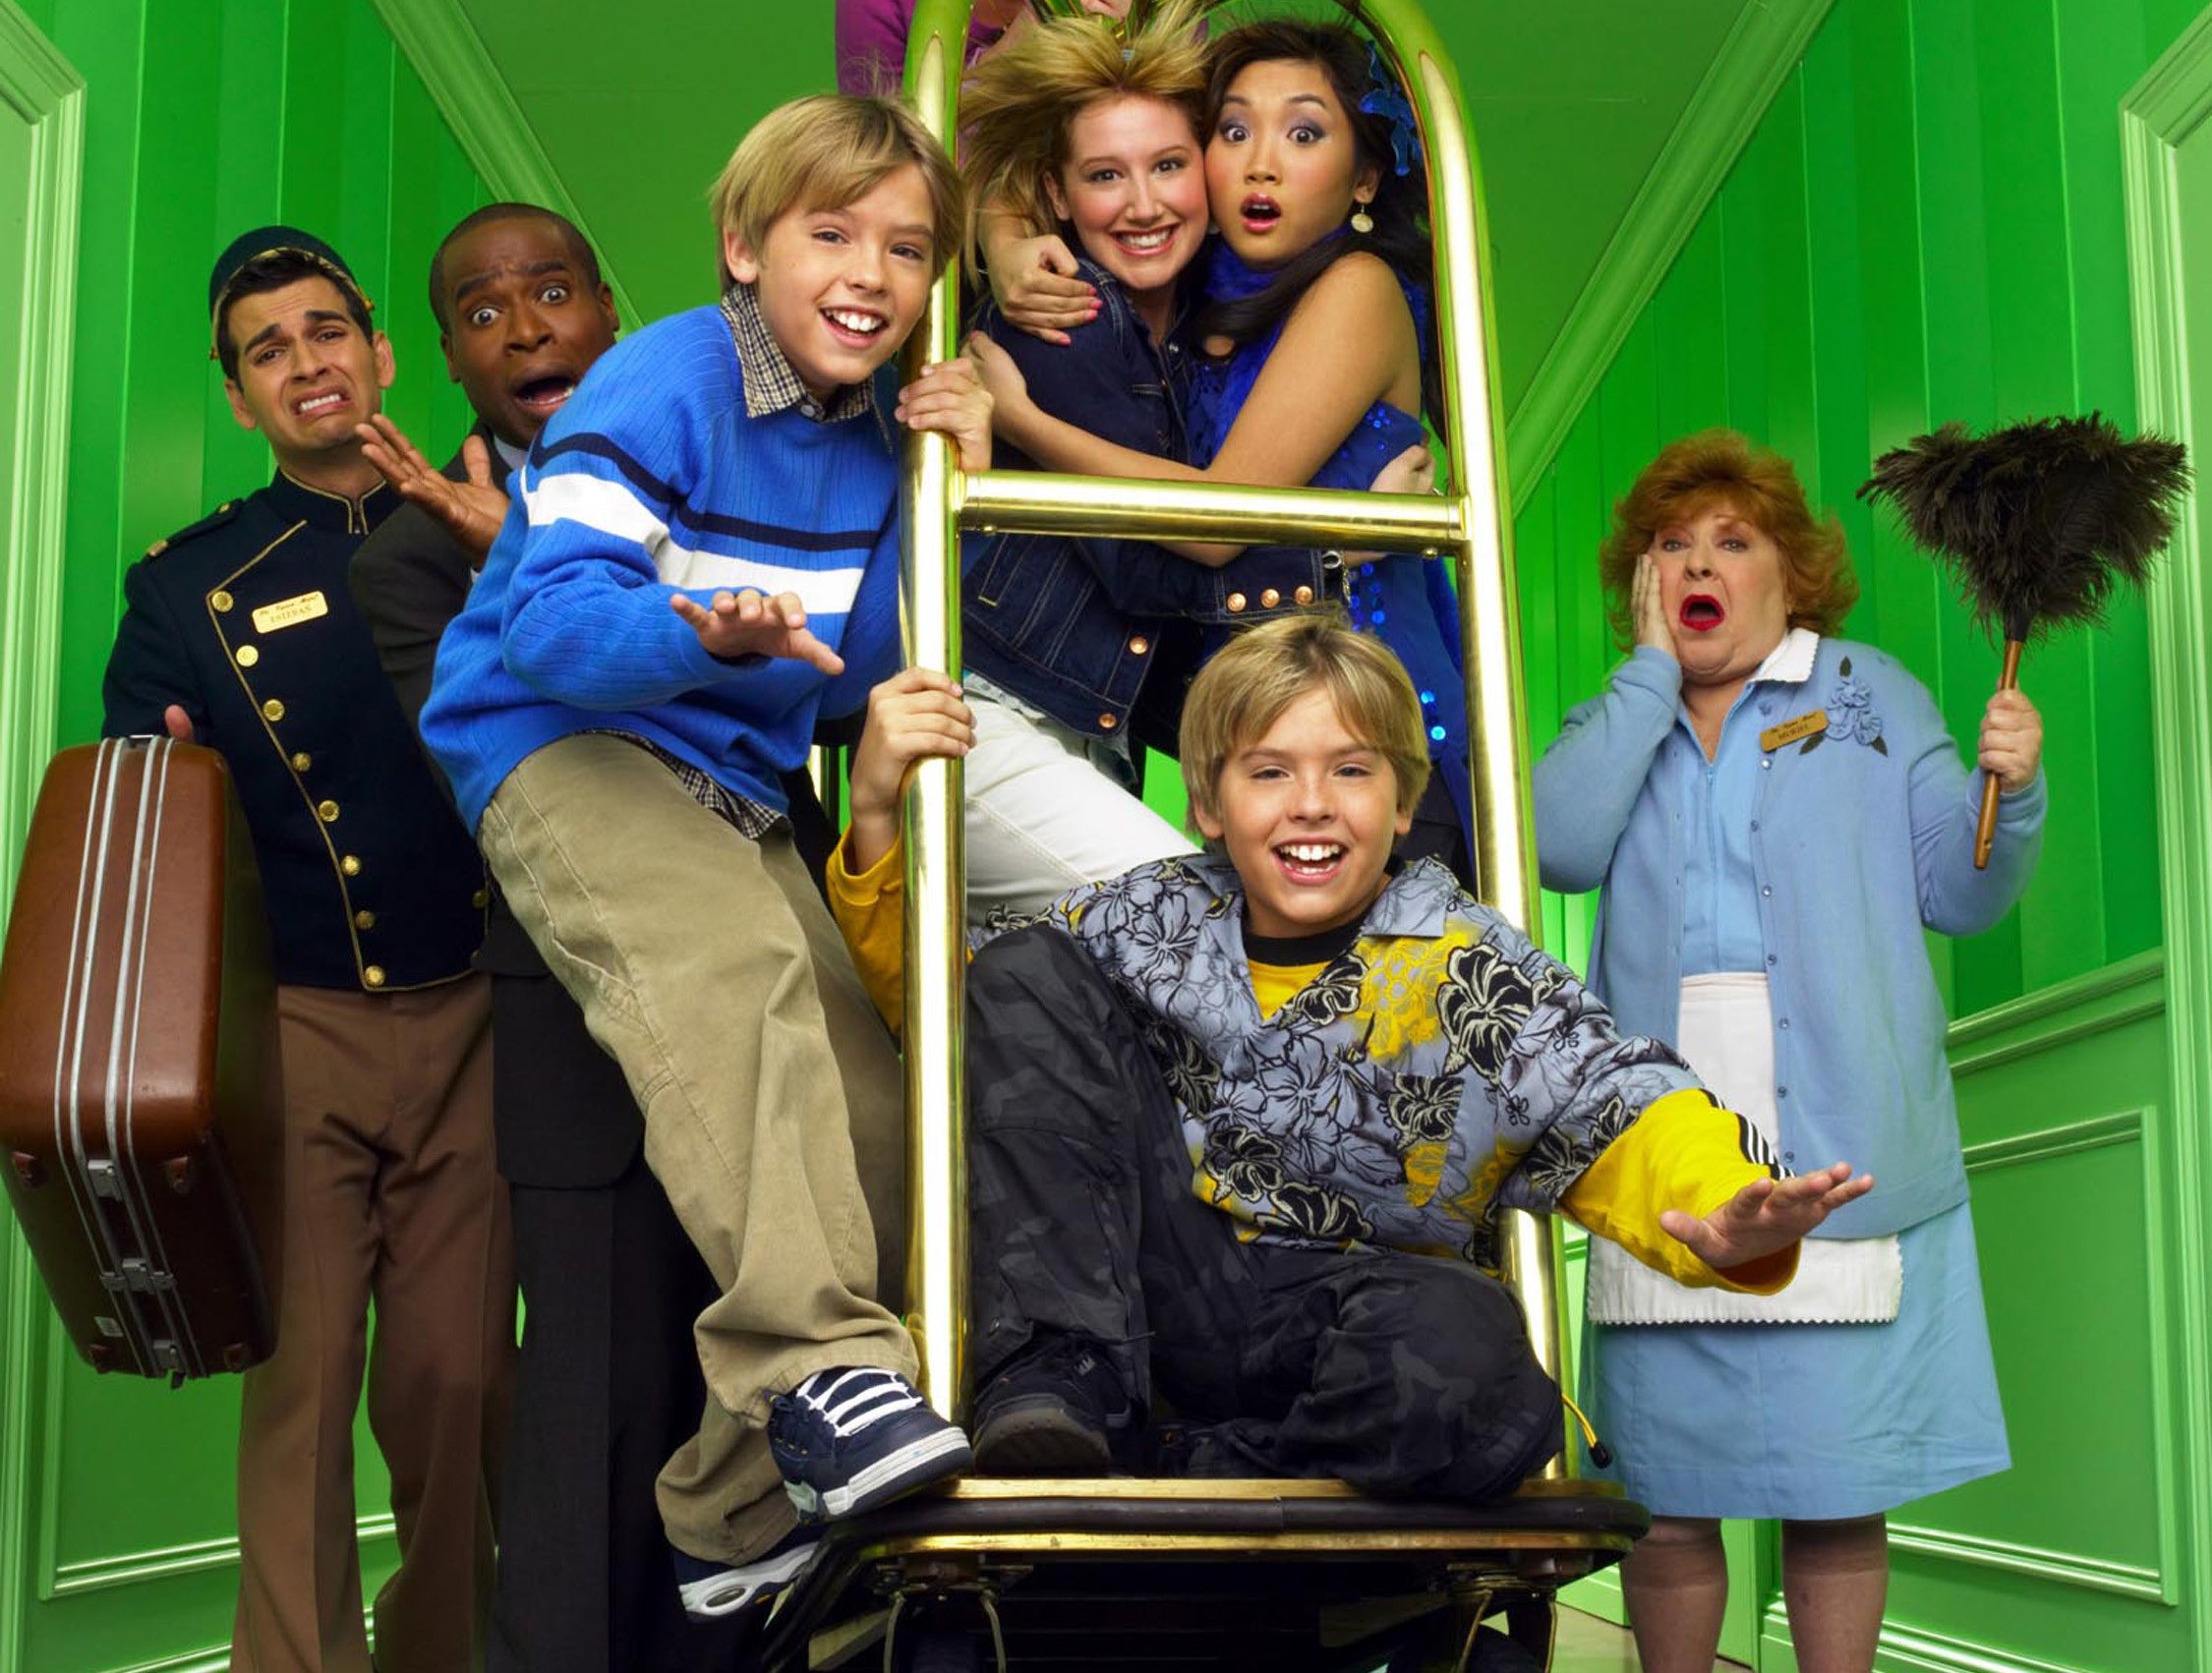 The cast of The Suite Life of Zack and Cody ride on a luggage cart